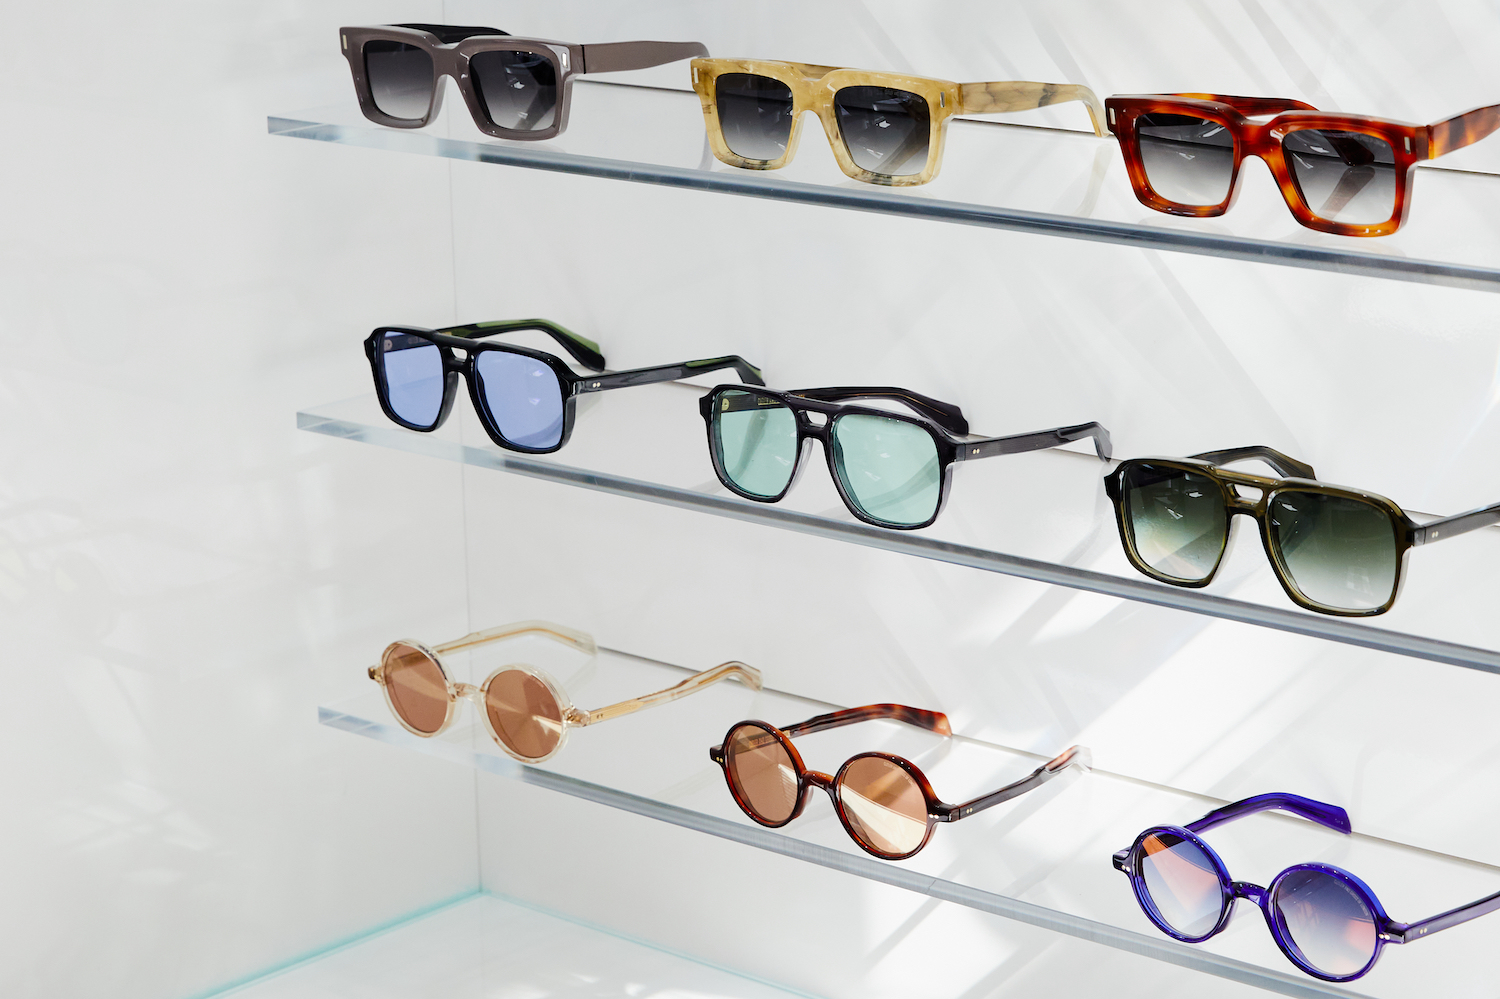 three rows of sunglasses on glass shelves in front of a white wall